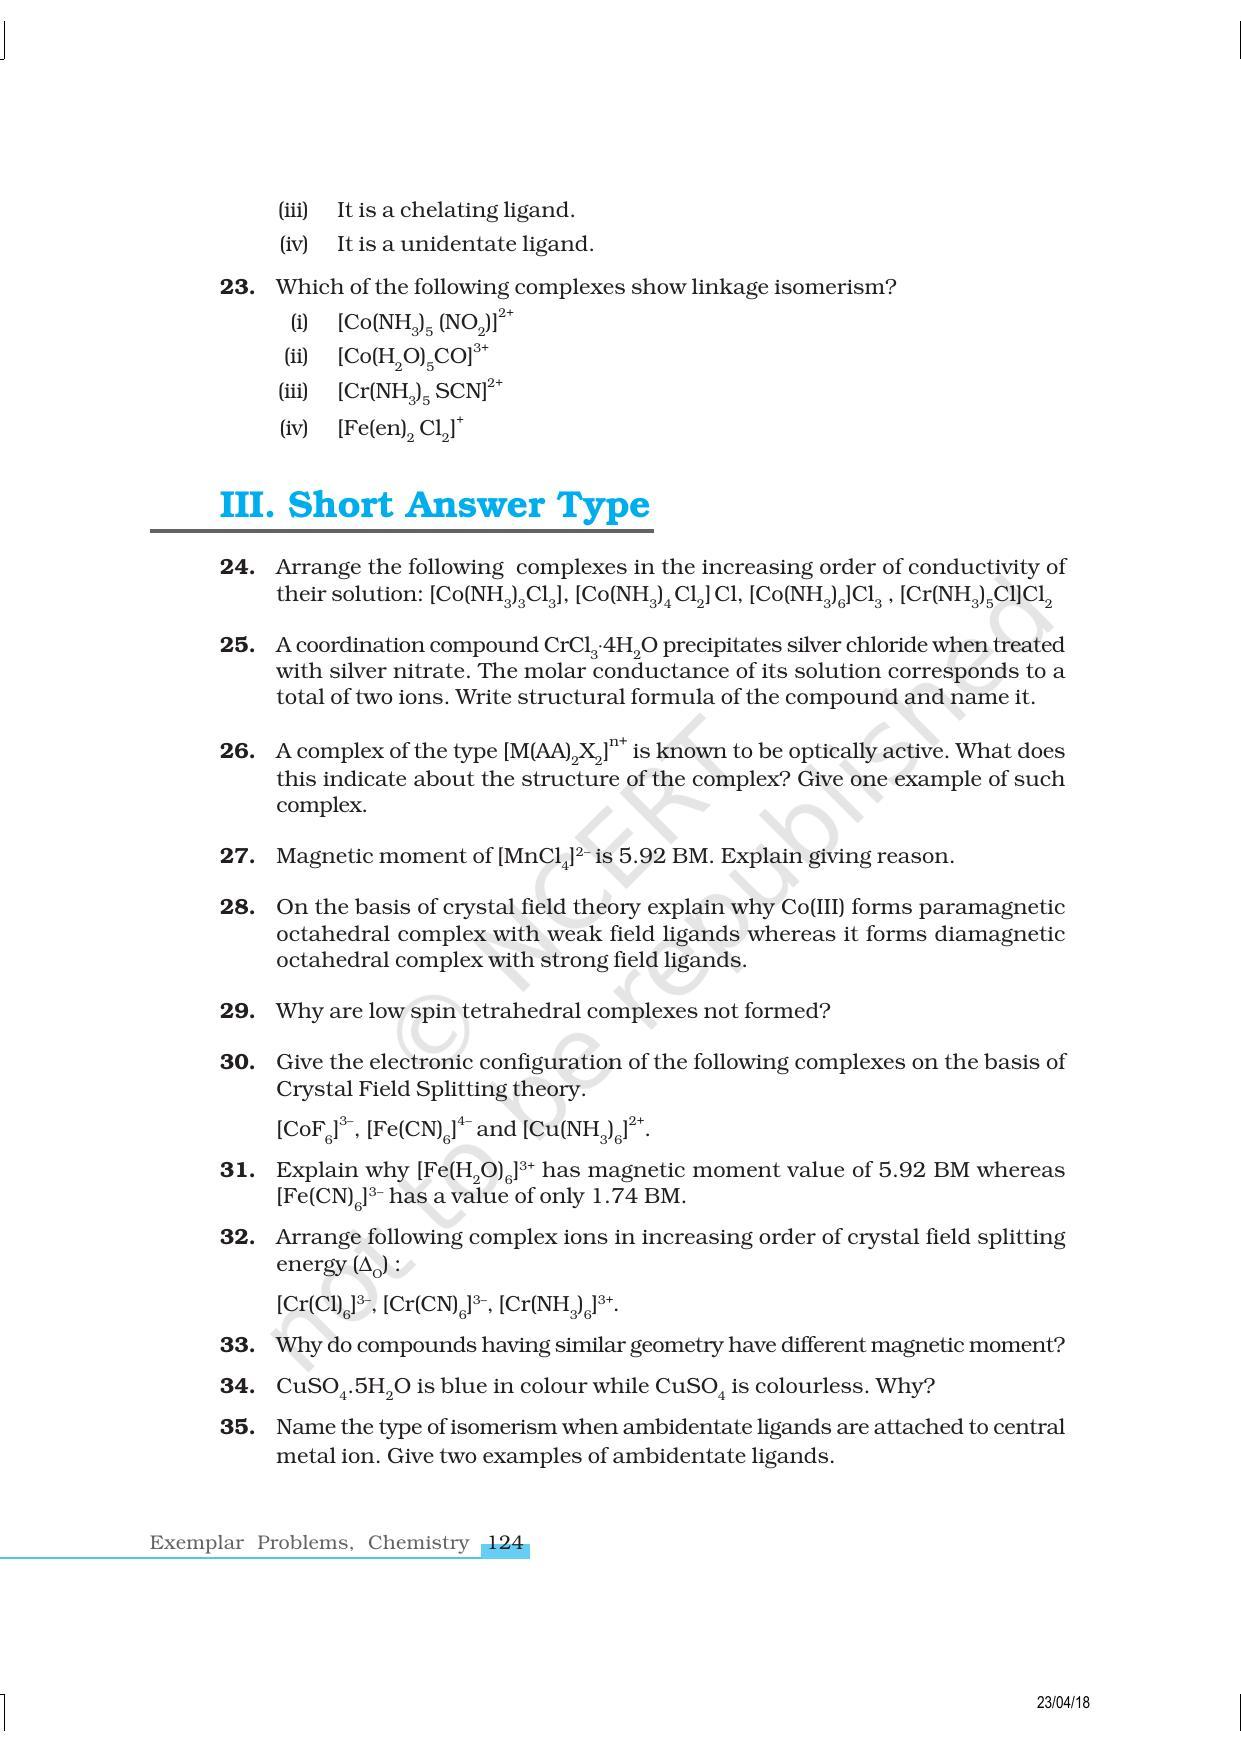 NCERT Exemplar Book for Class 12 Chemistry: Chapter 9 Coordination Compounds - Page 5